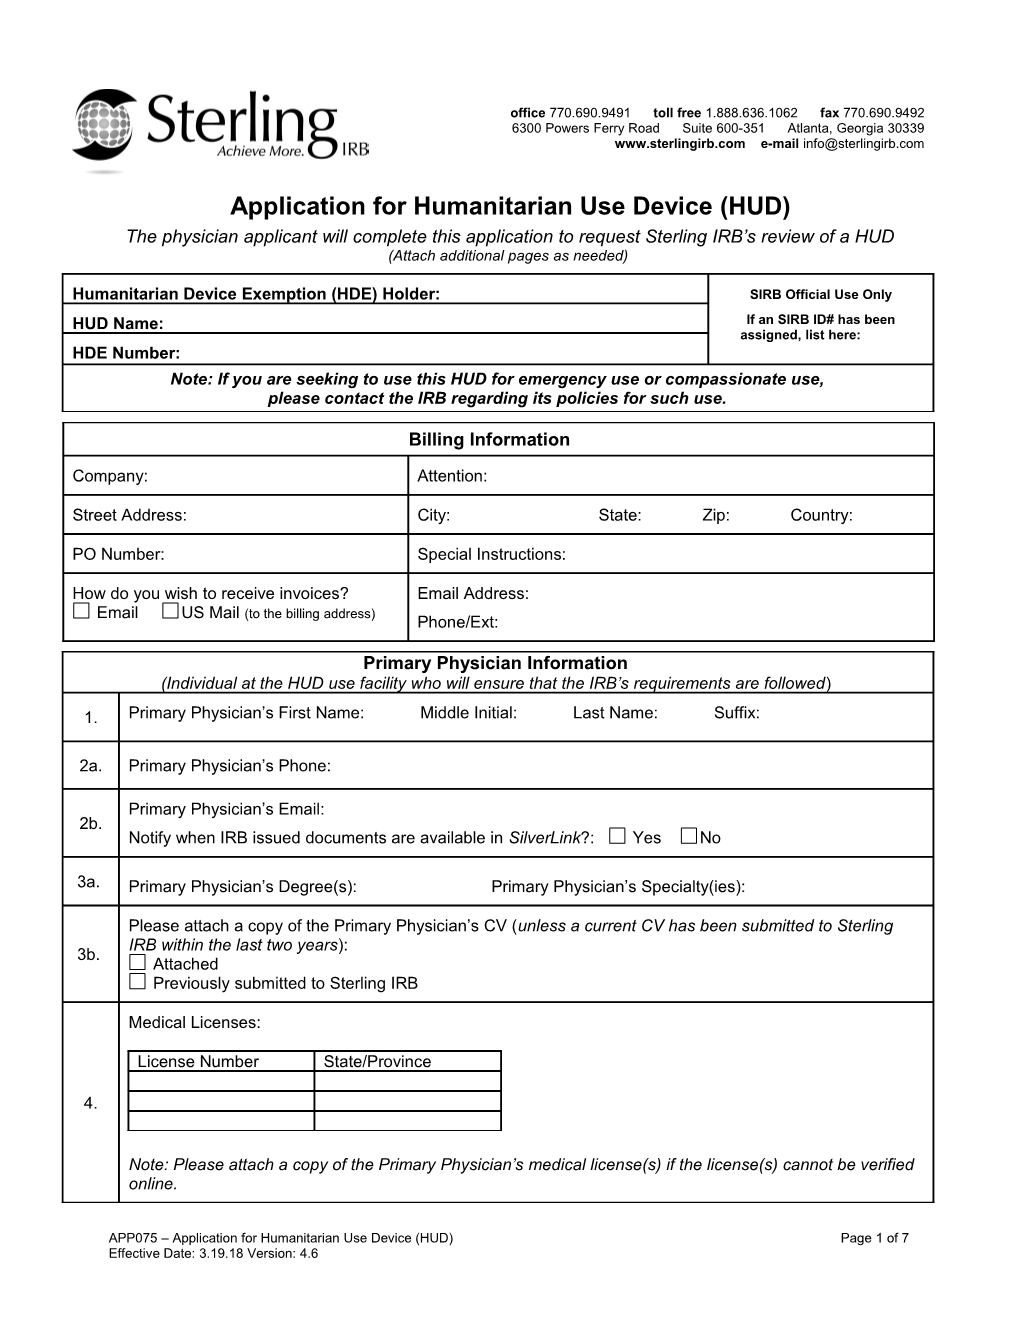 Application for Humanitarian Use Device (HUD)